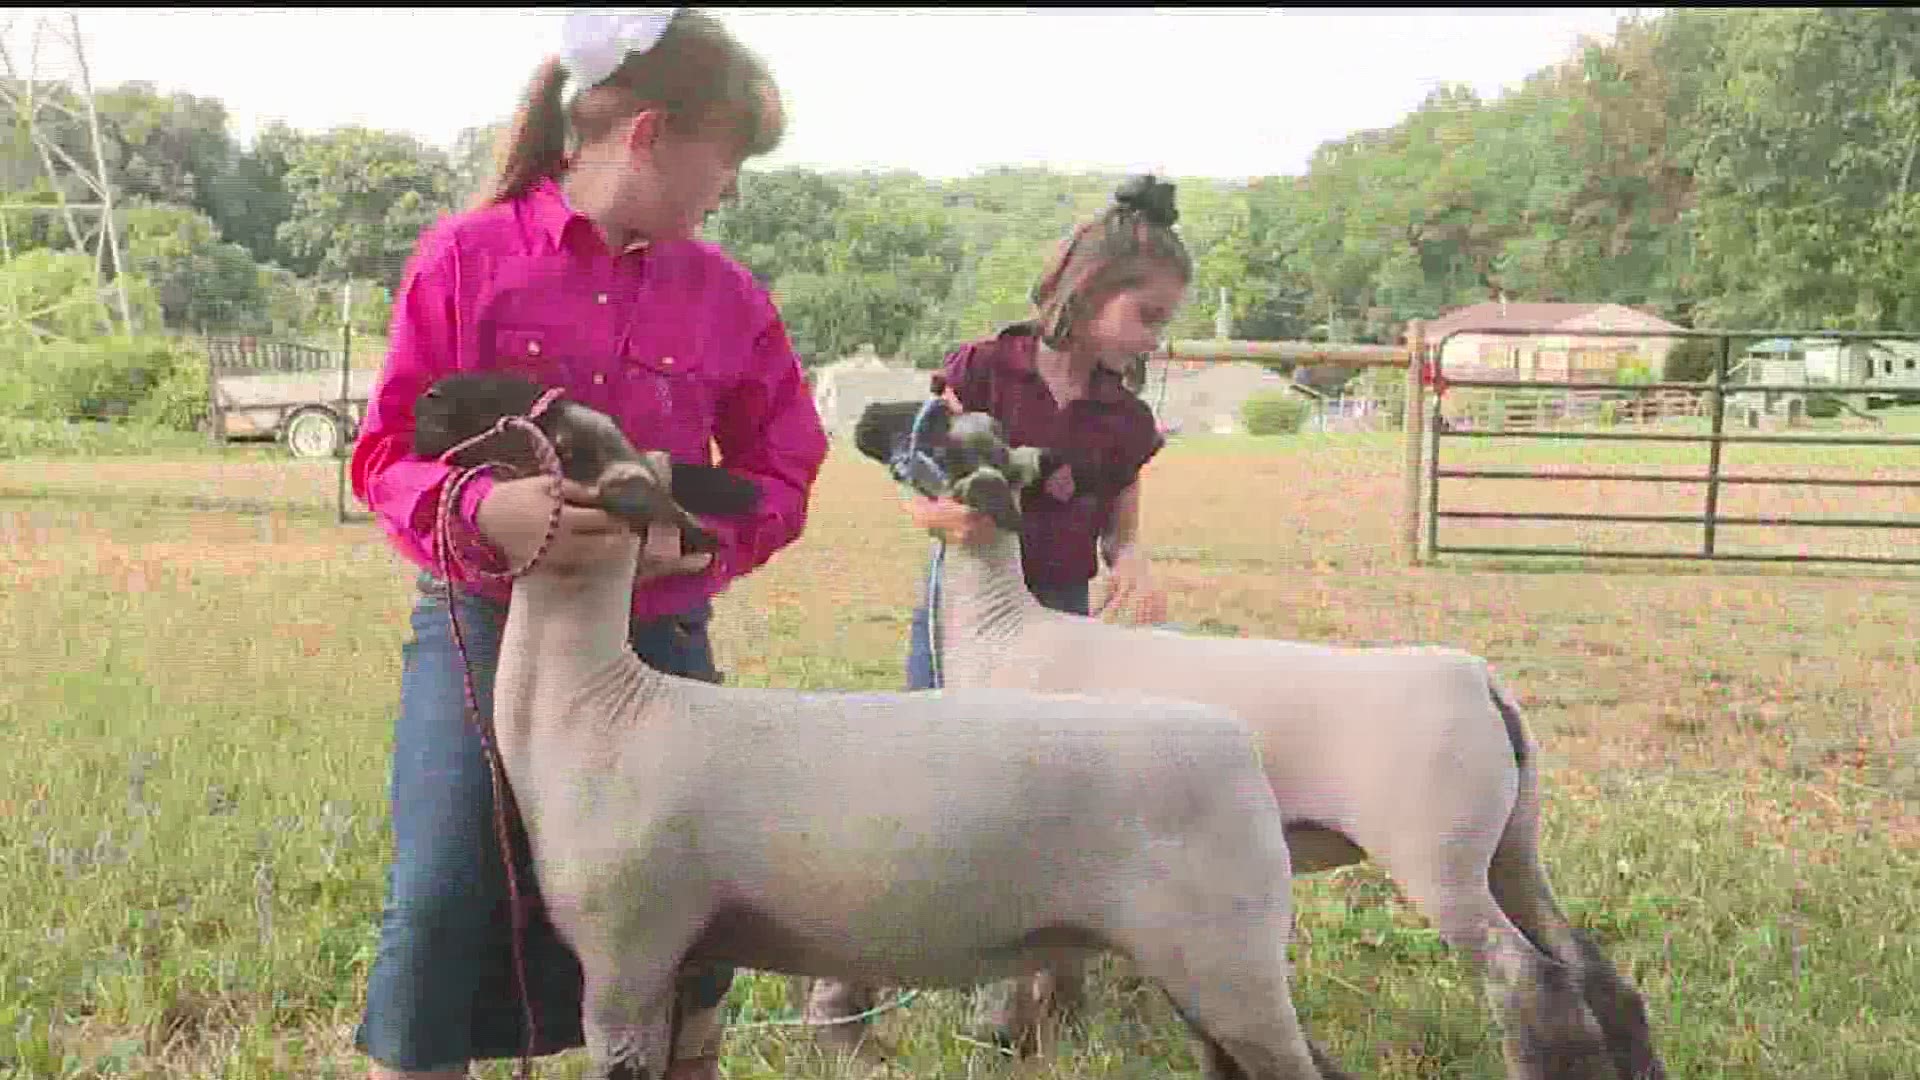 Despite the York Fair's cancellation in 2020, numerous other livestock shows and auctions are popping up across South Central Pennsylvania.